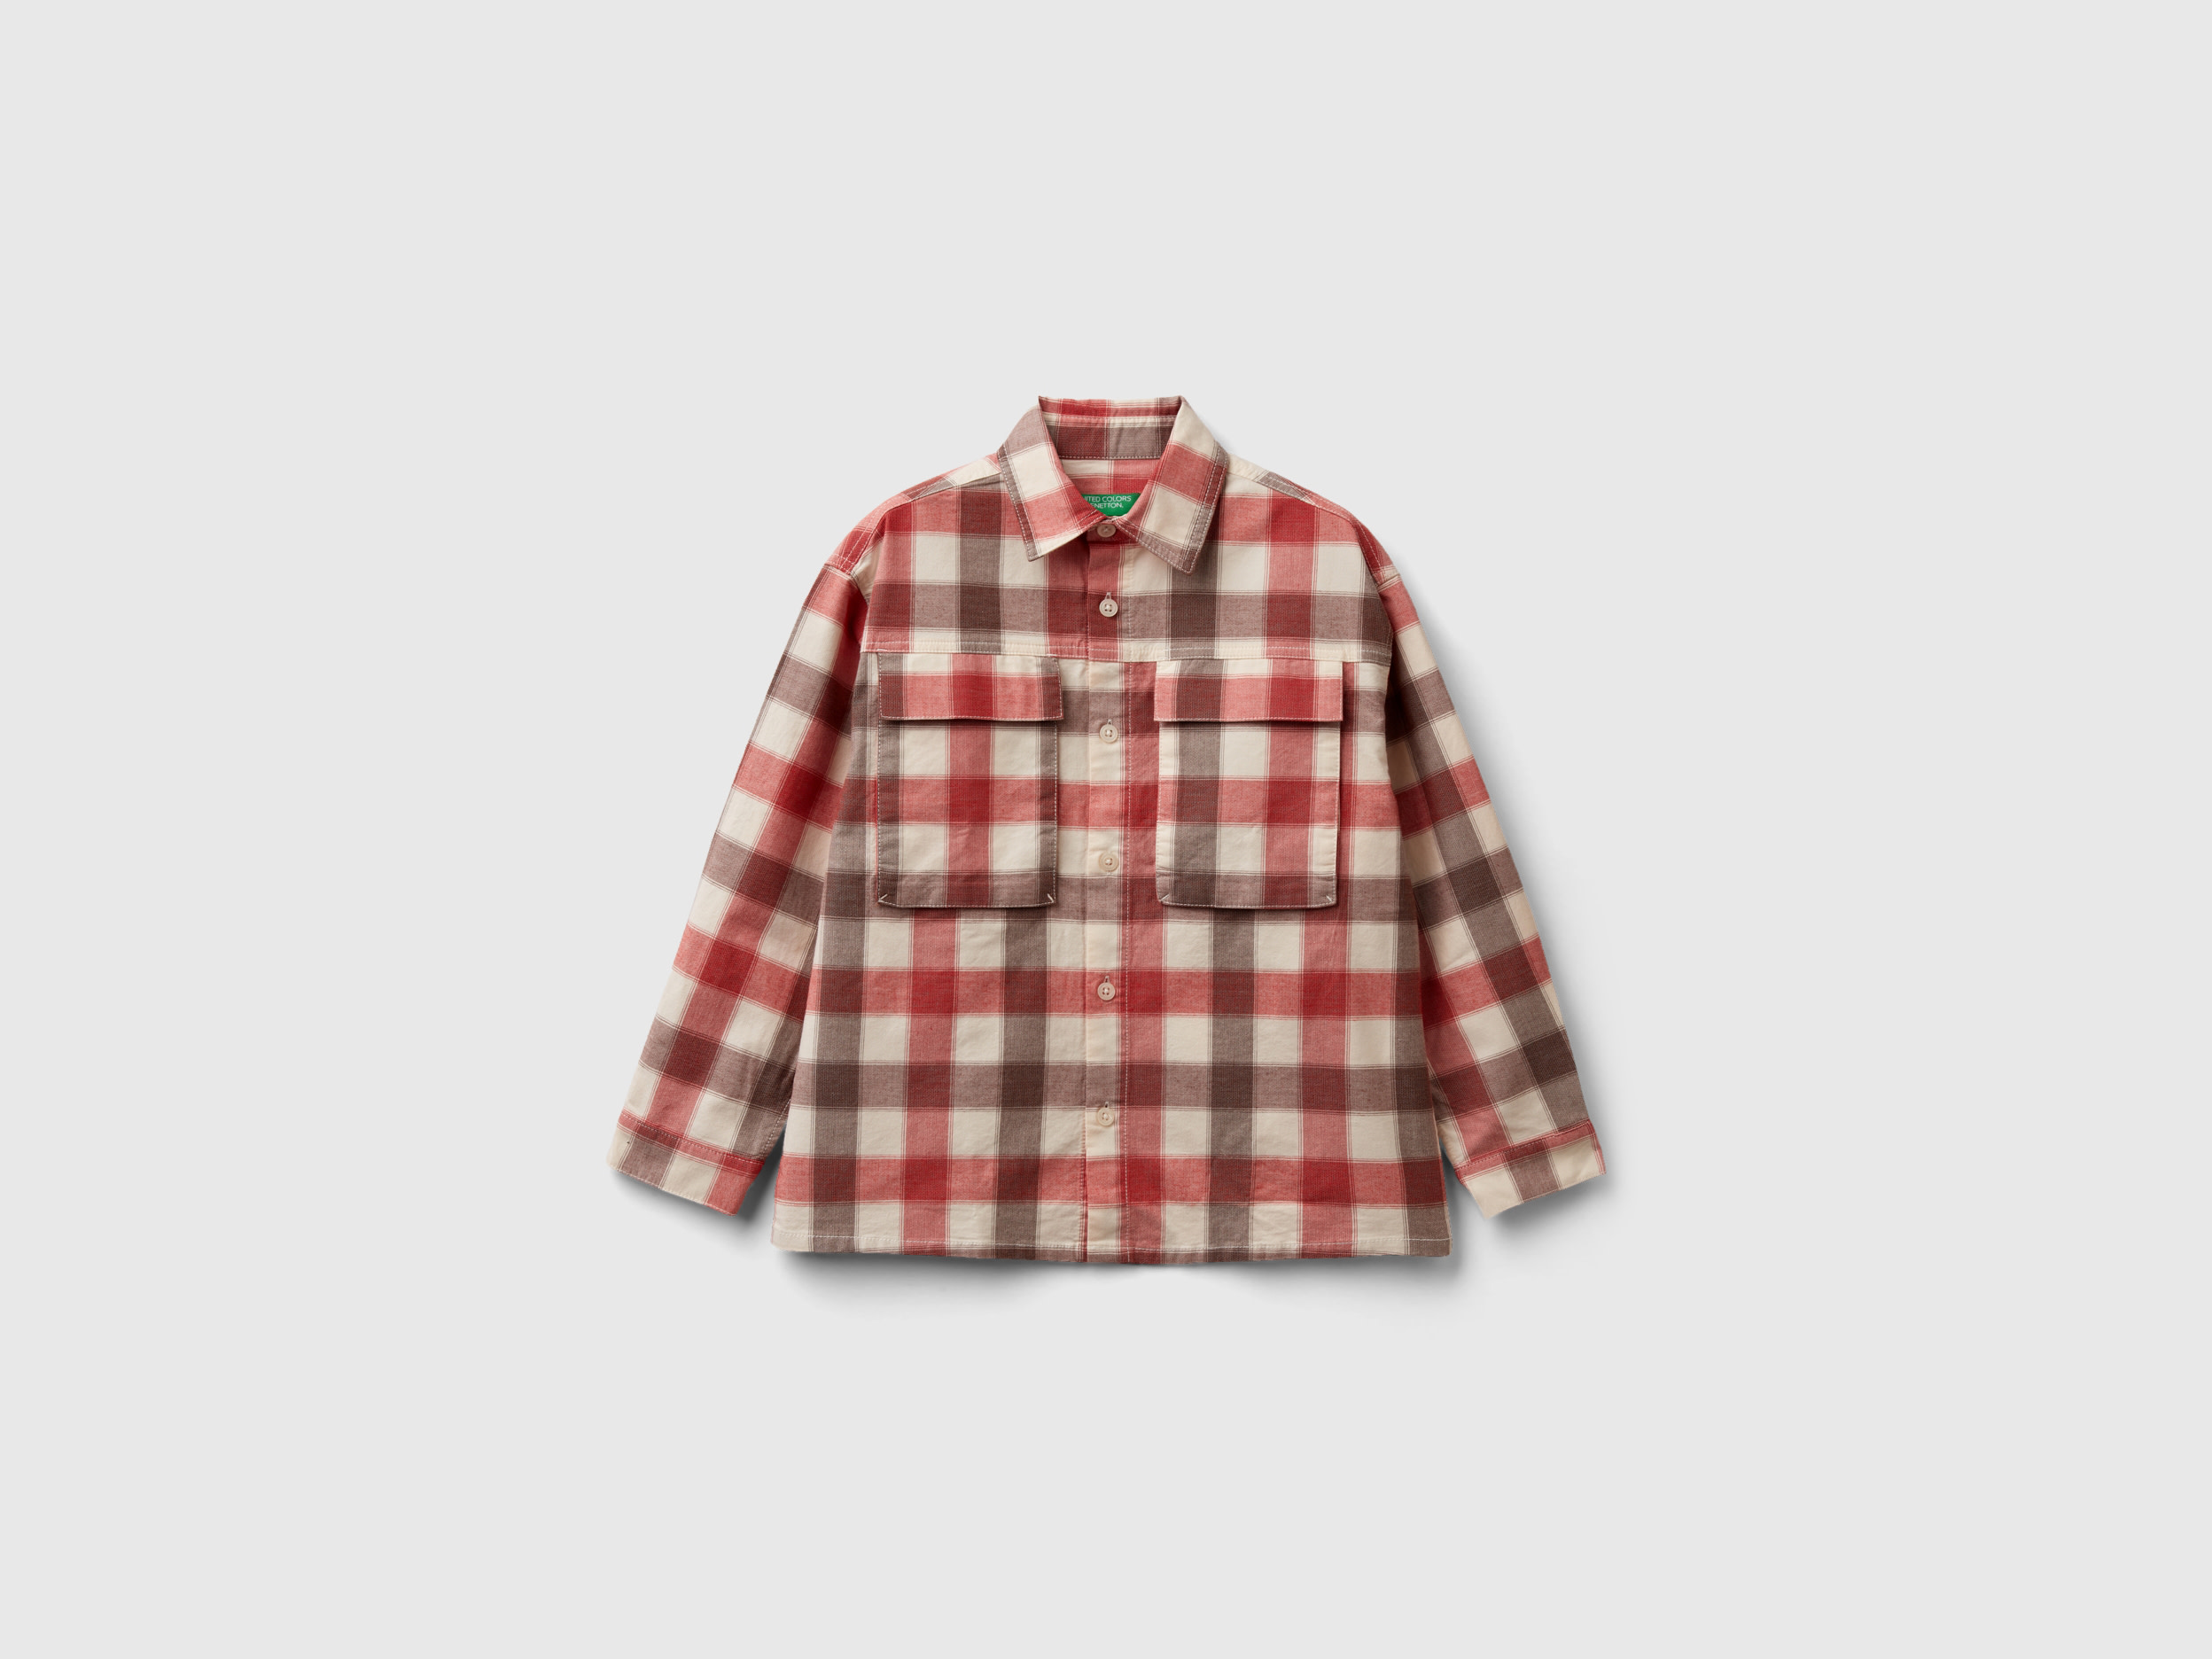 Benetton, Check Shirt In Stretch Cotton, size 3XL, Red, Kids